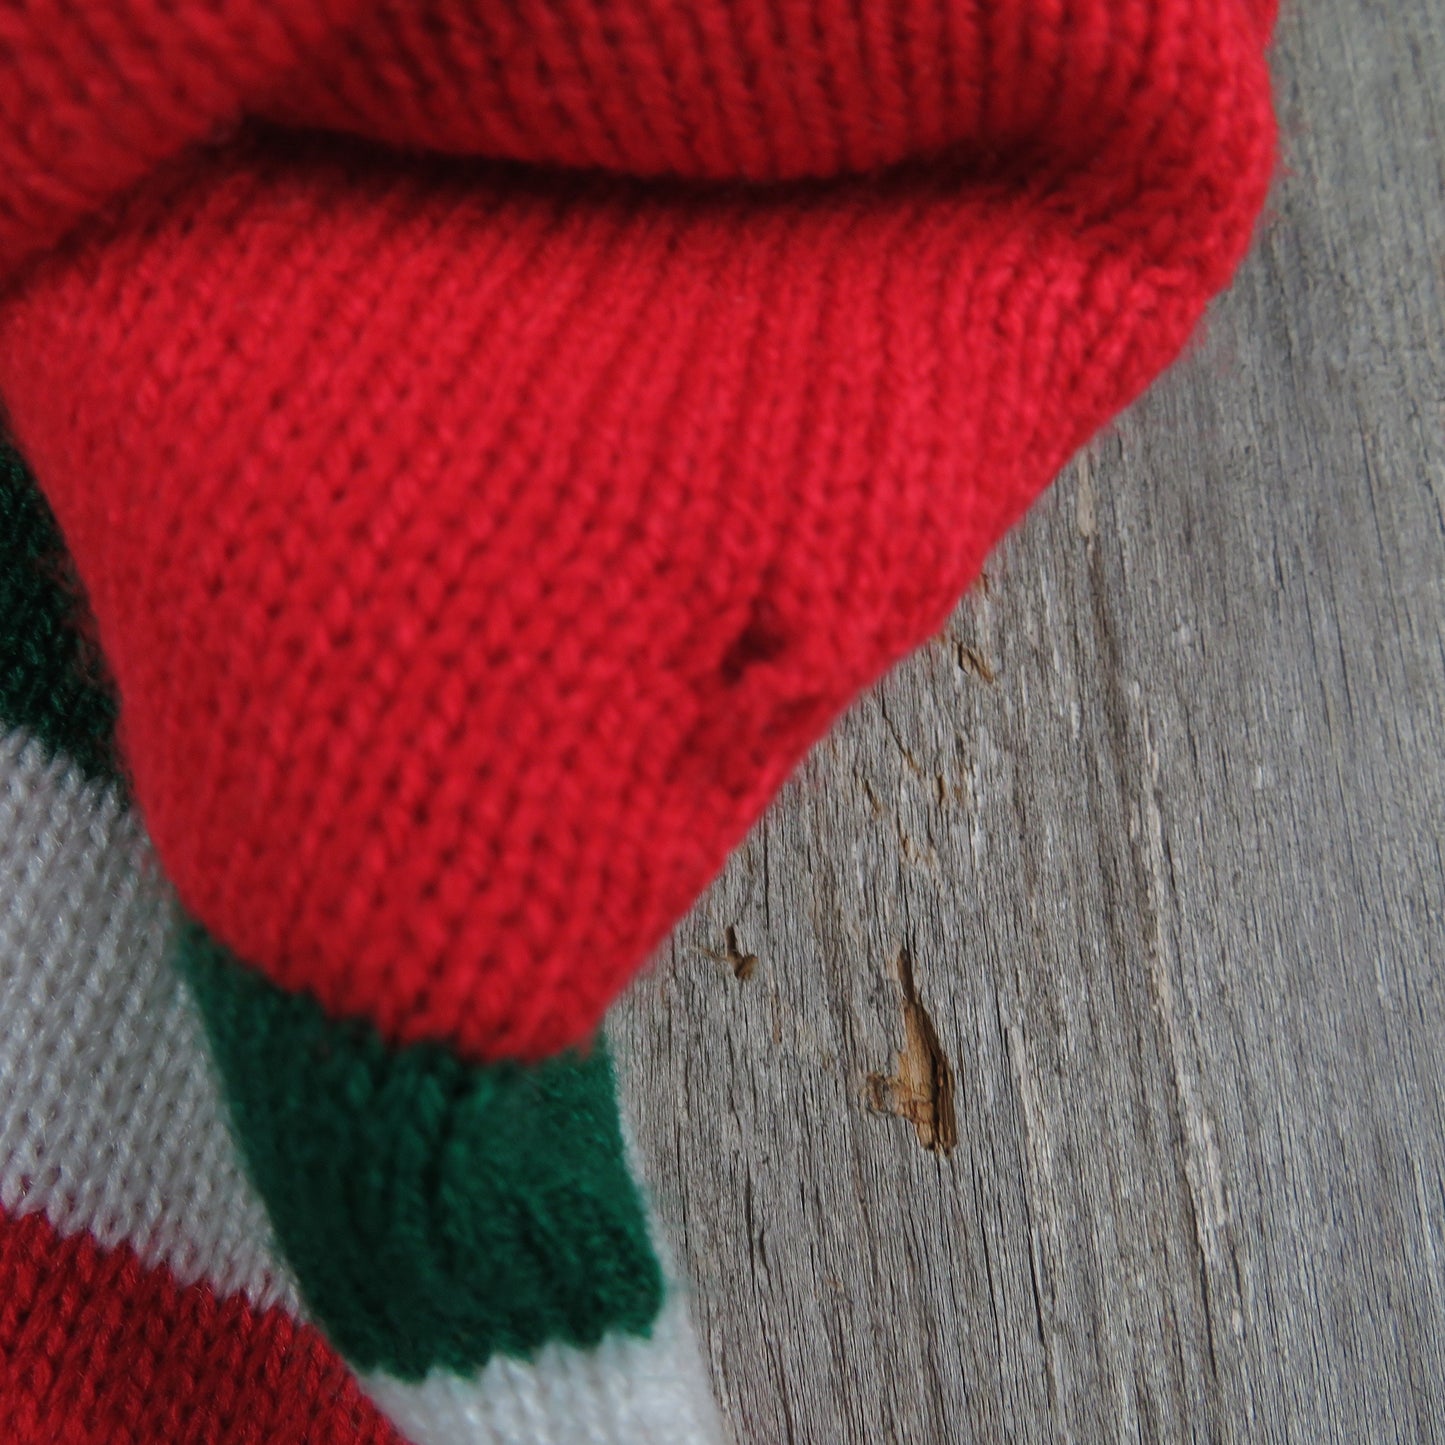 Vintage Striped Knit Stocking Red White Green Christmas Knitted 80s